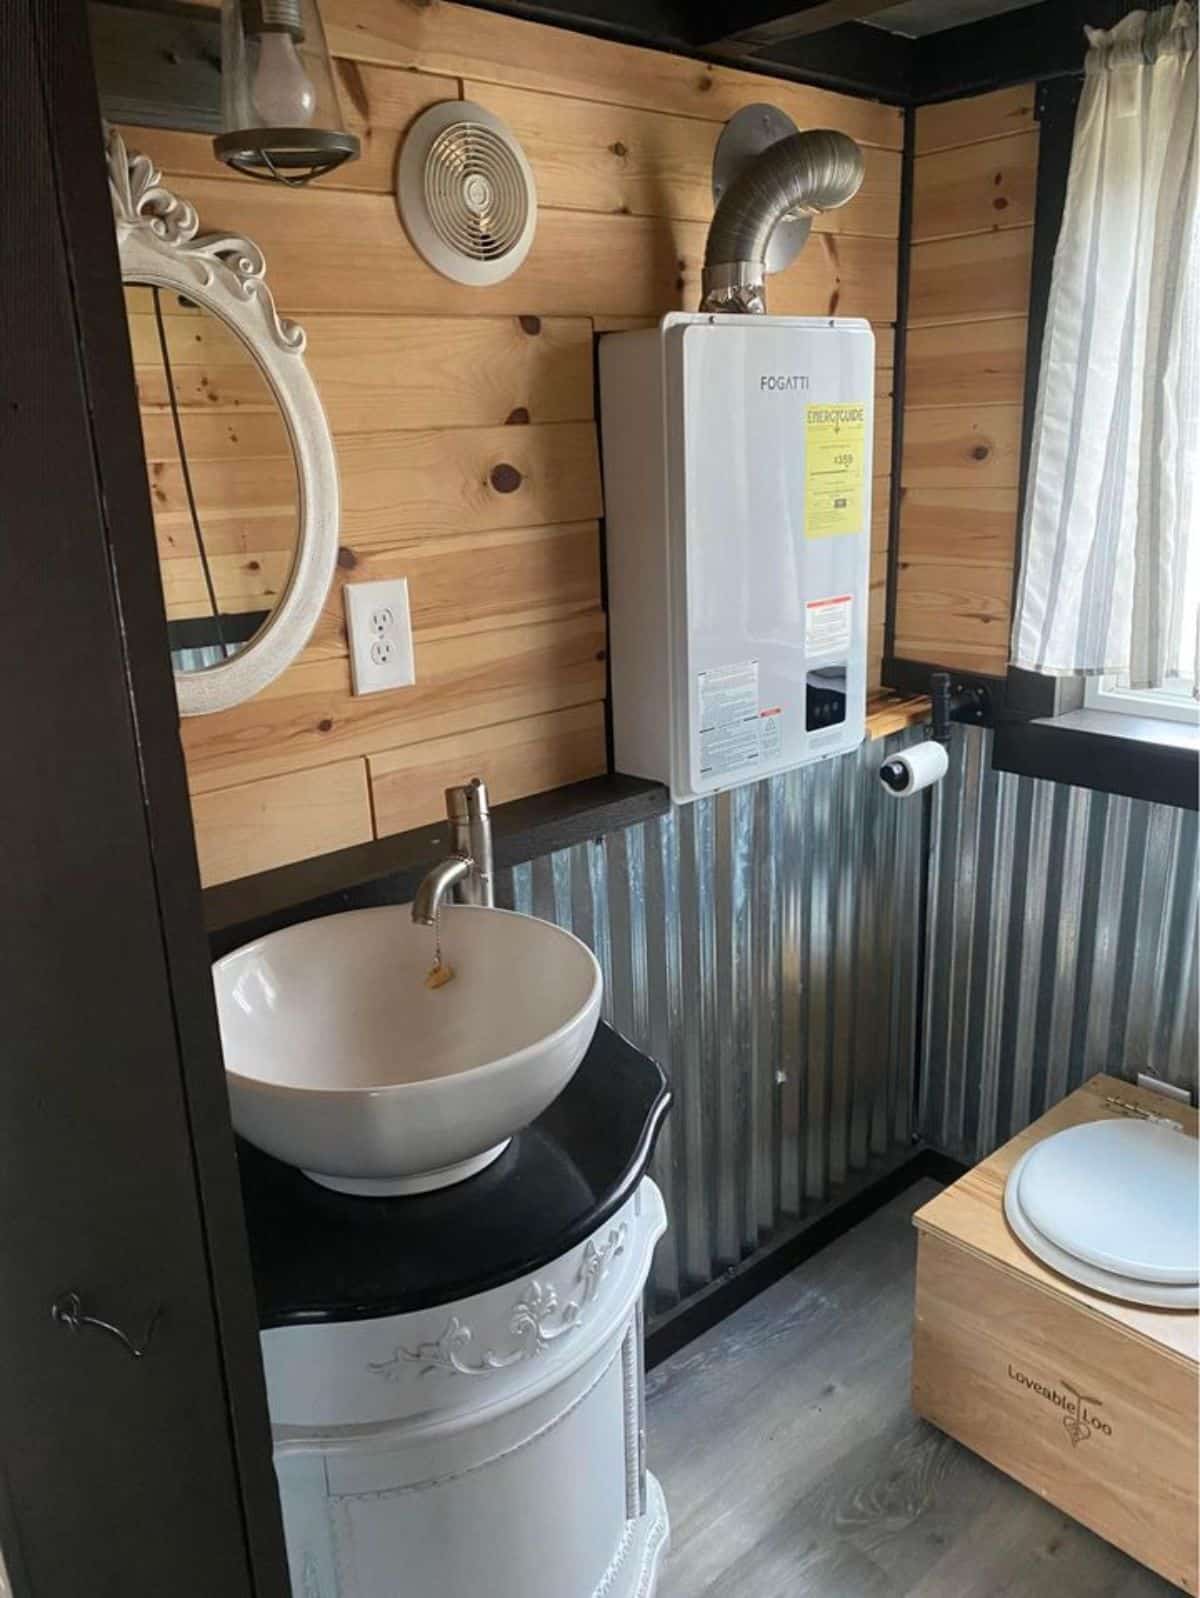 Composting toilet with sink in bathroom